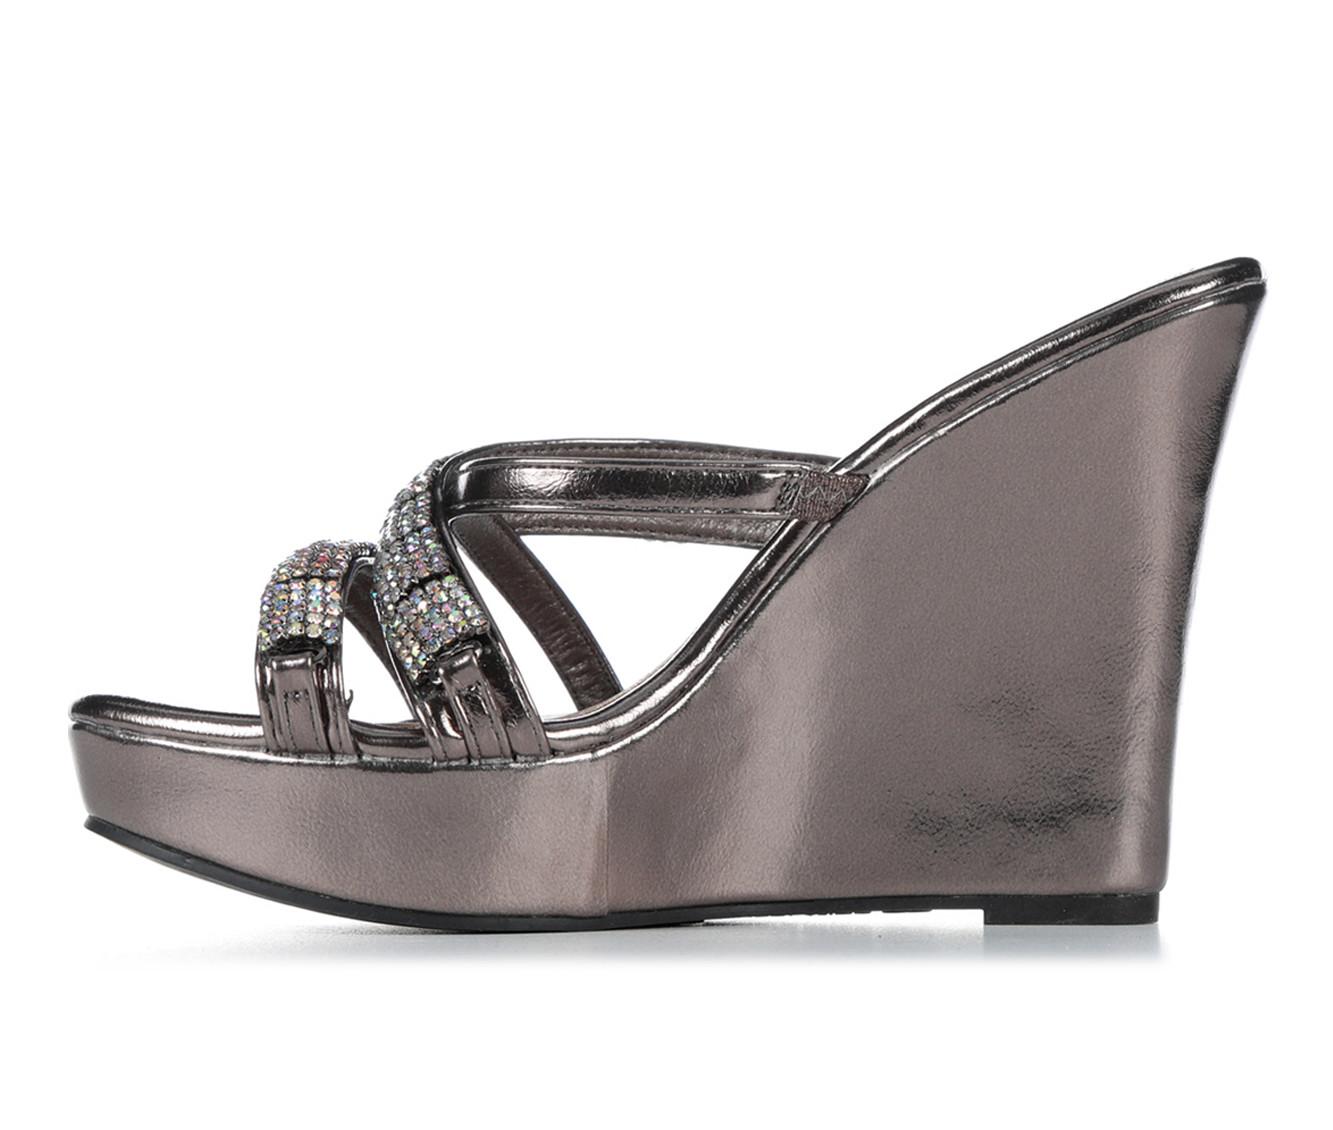 Women's Daisy Fuentes Spencer Wedges | Shoe Carnival